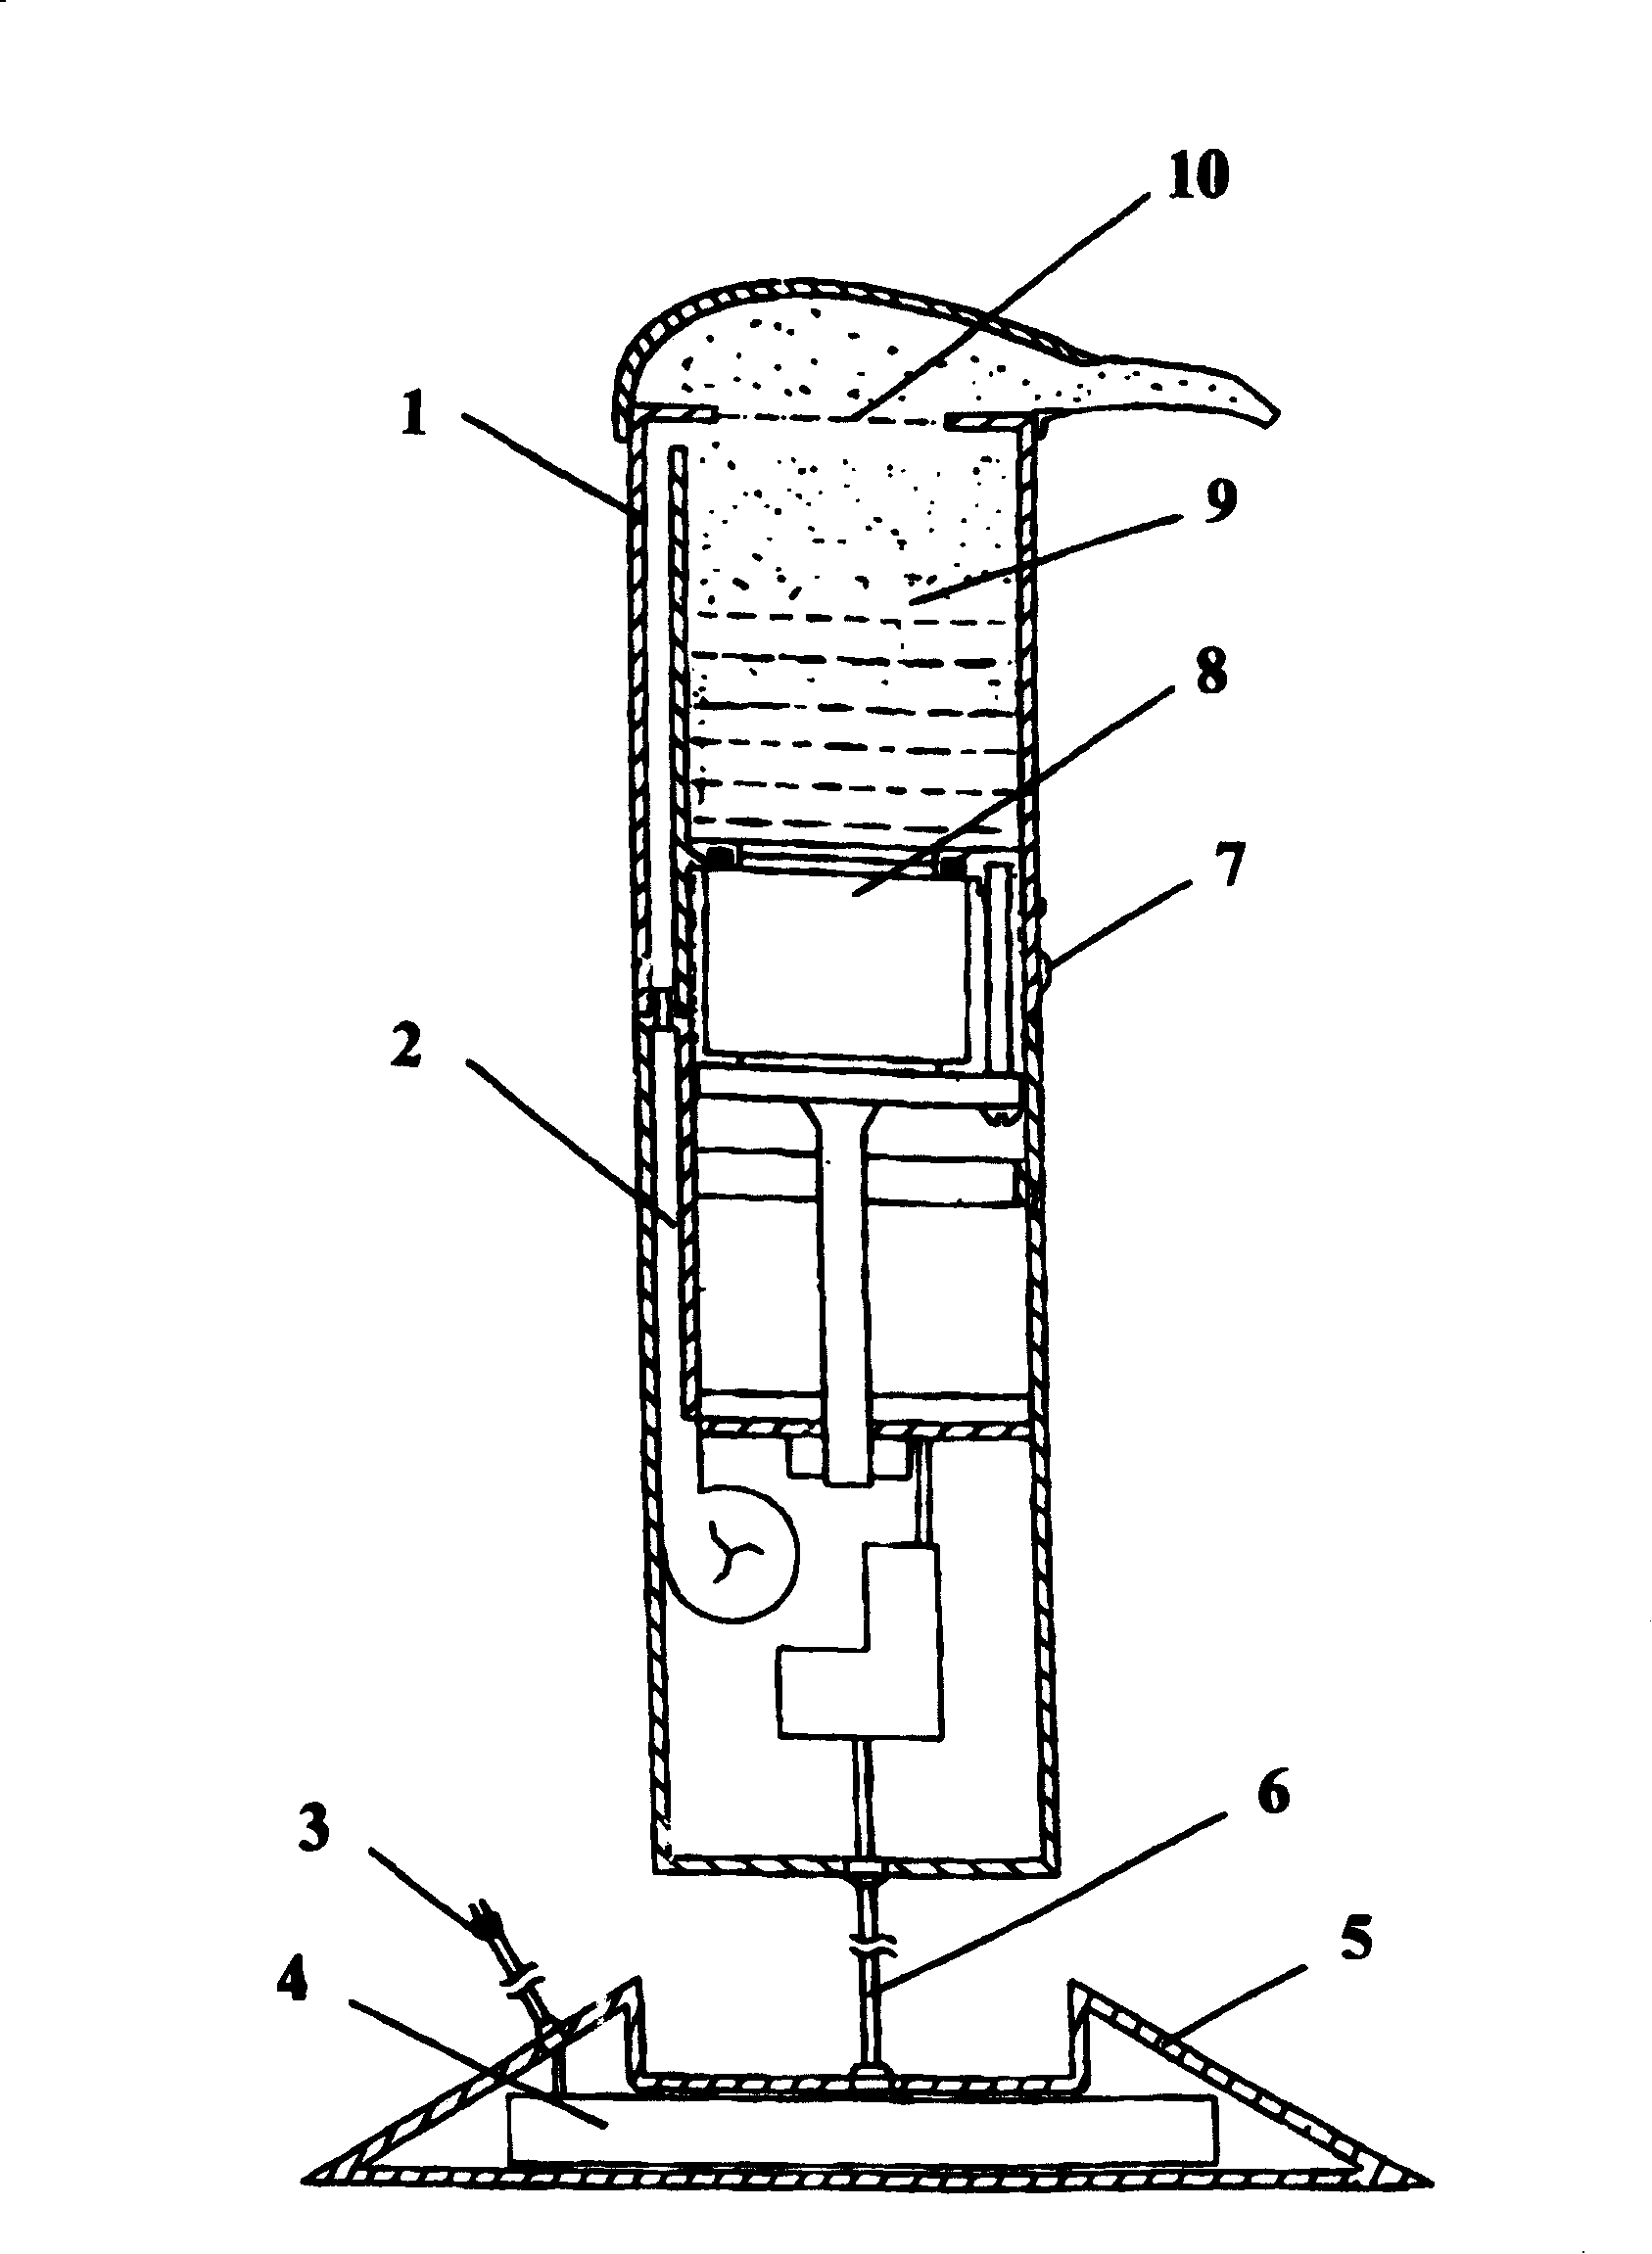 Hair dyeing and care method of ultrasonic pulverization and its equipment